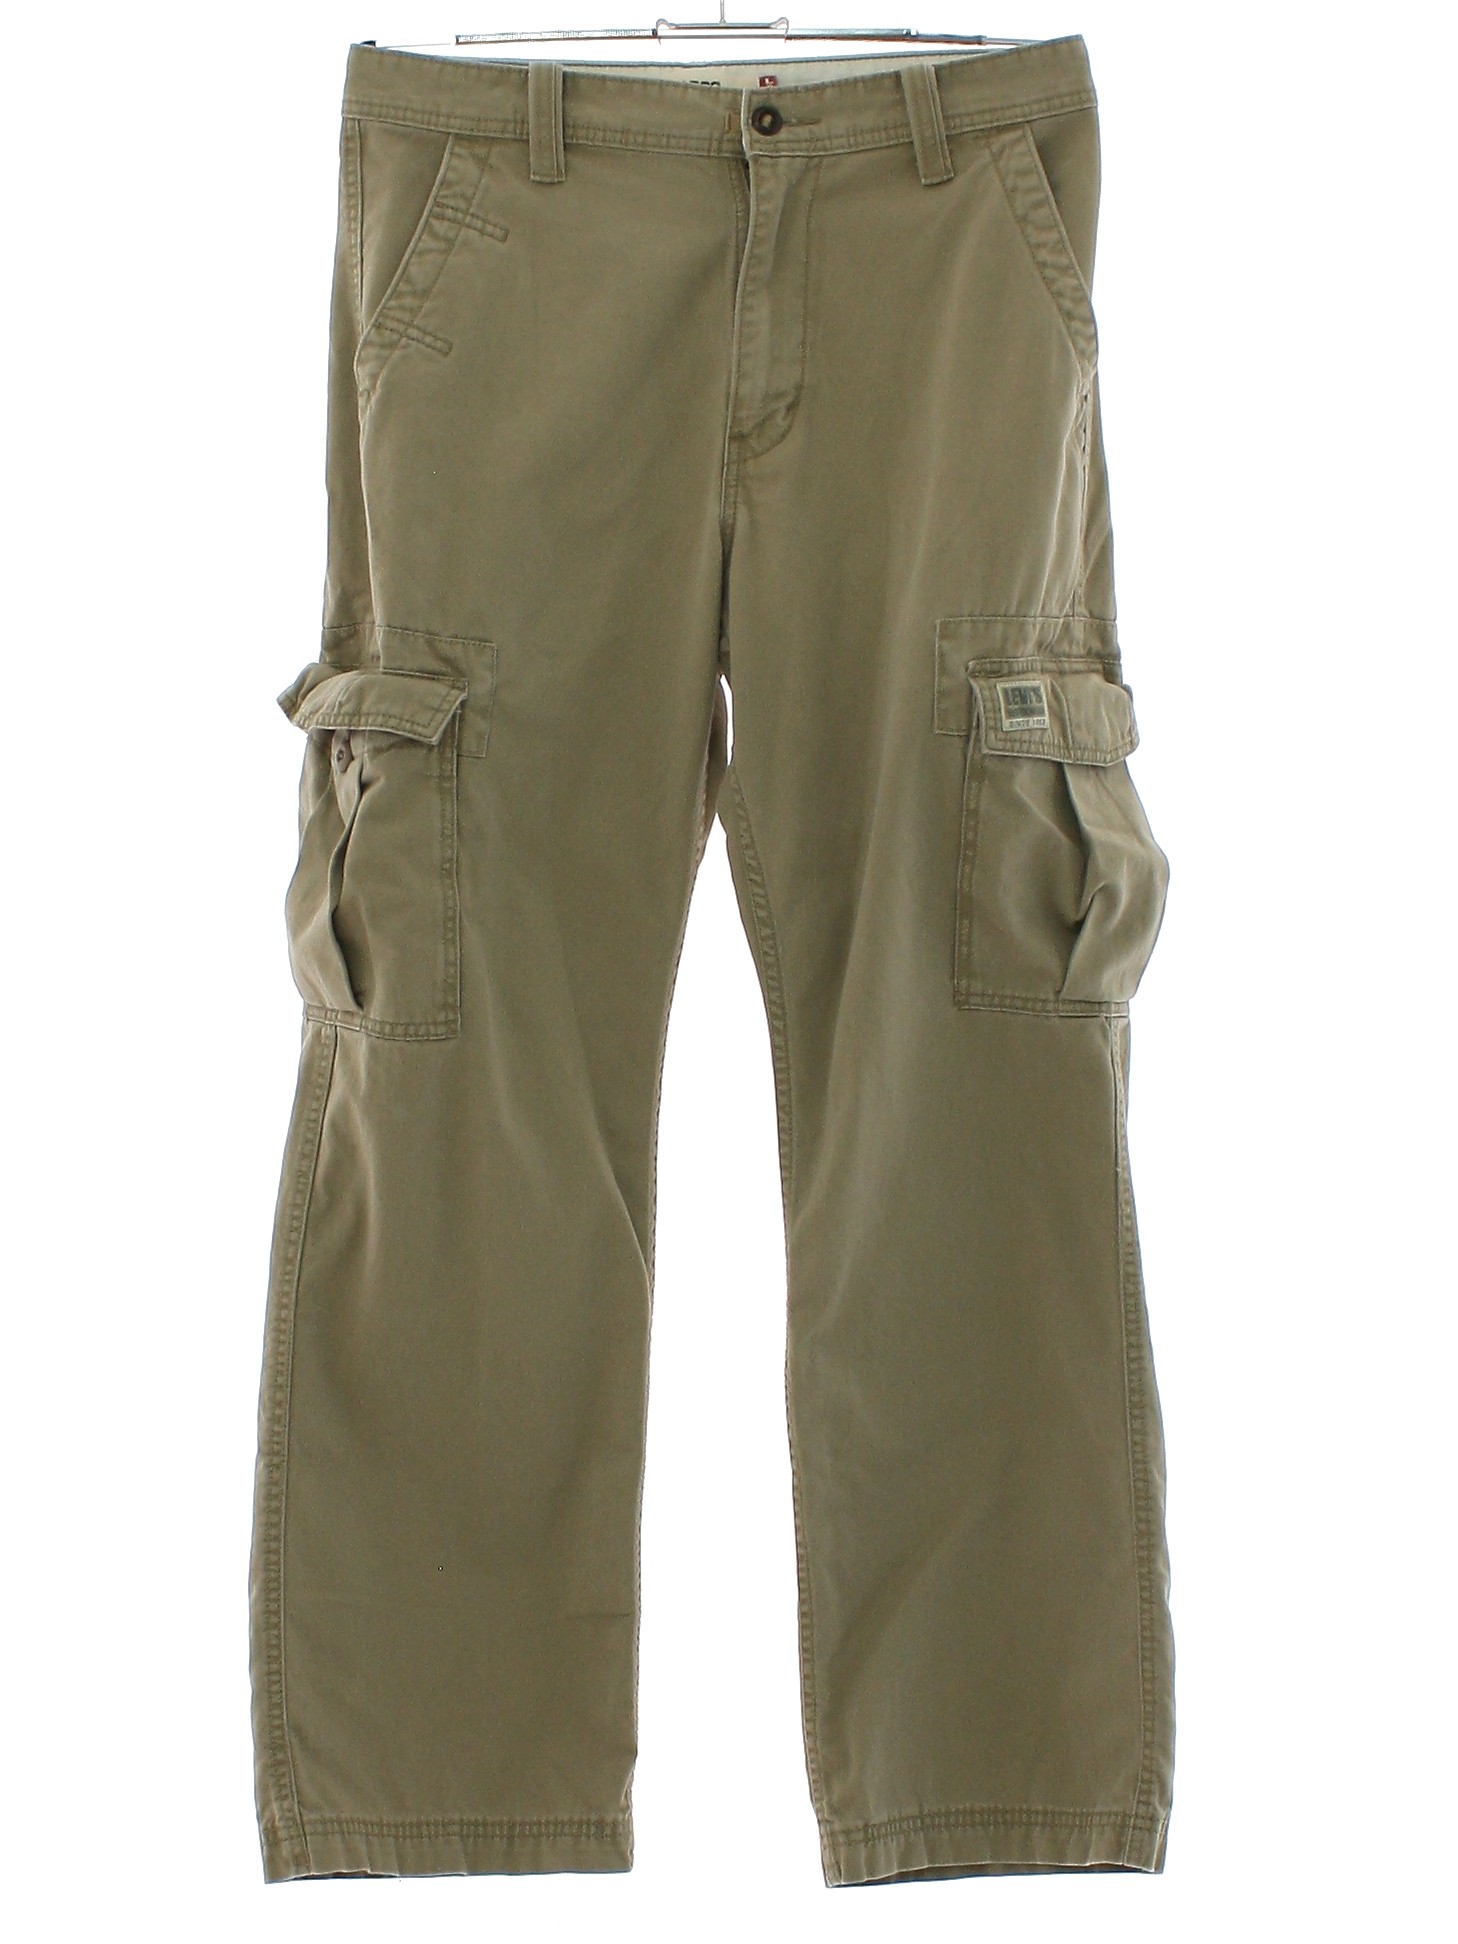 Pants: 90s -Levis Loose Straight Cargo- Mens khaki tan cotton twill cargo  pants with flat front, brass zipper fly, straight legs, plain cuffless  hems, side leg bellows style cargo pockets with buttoned